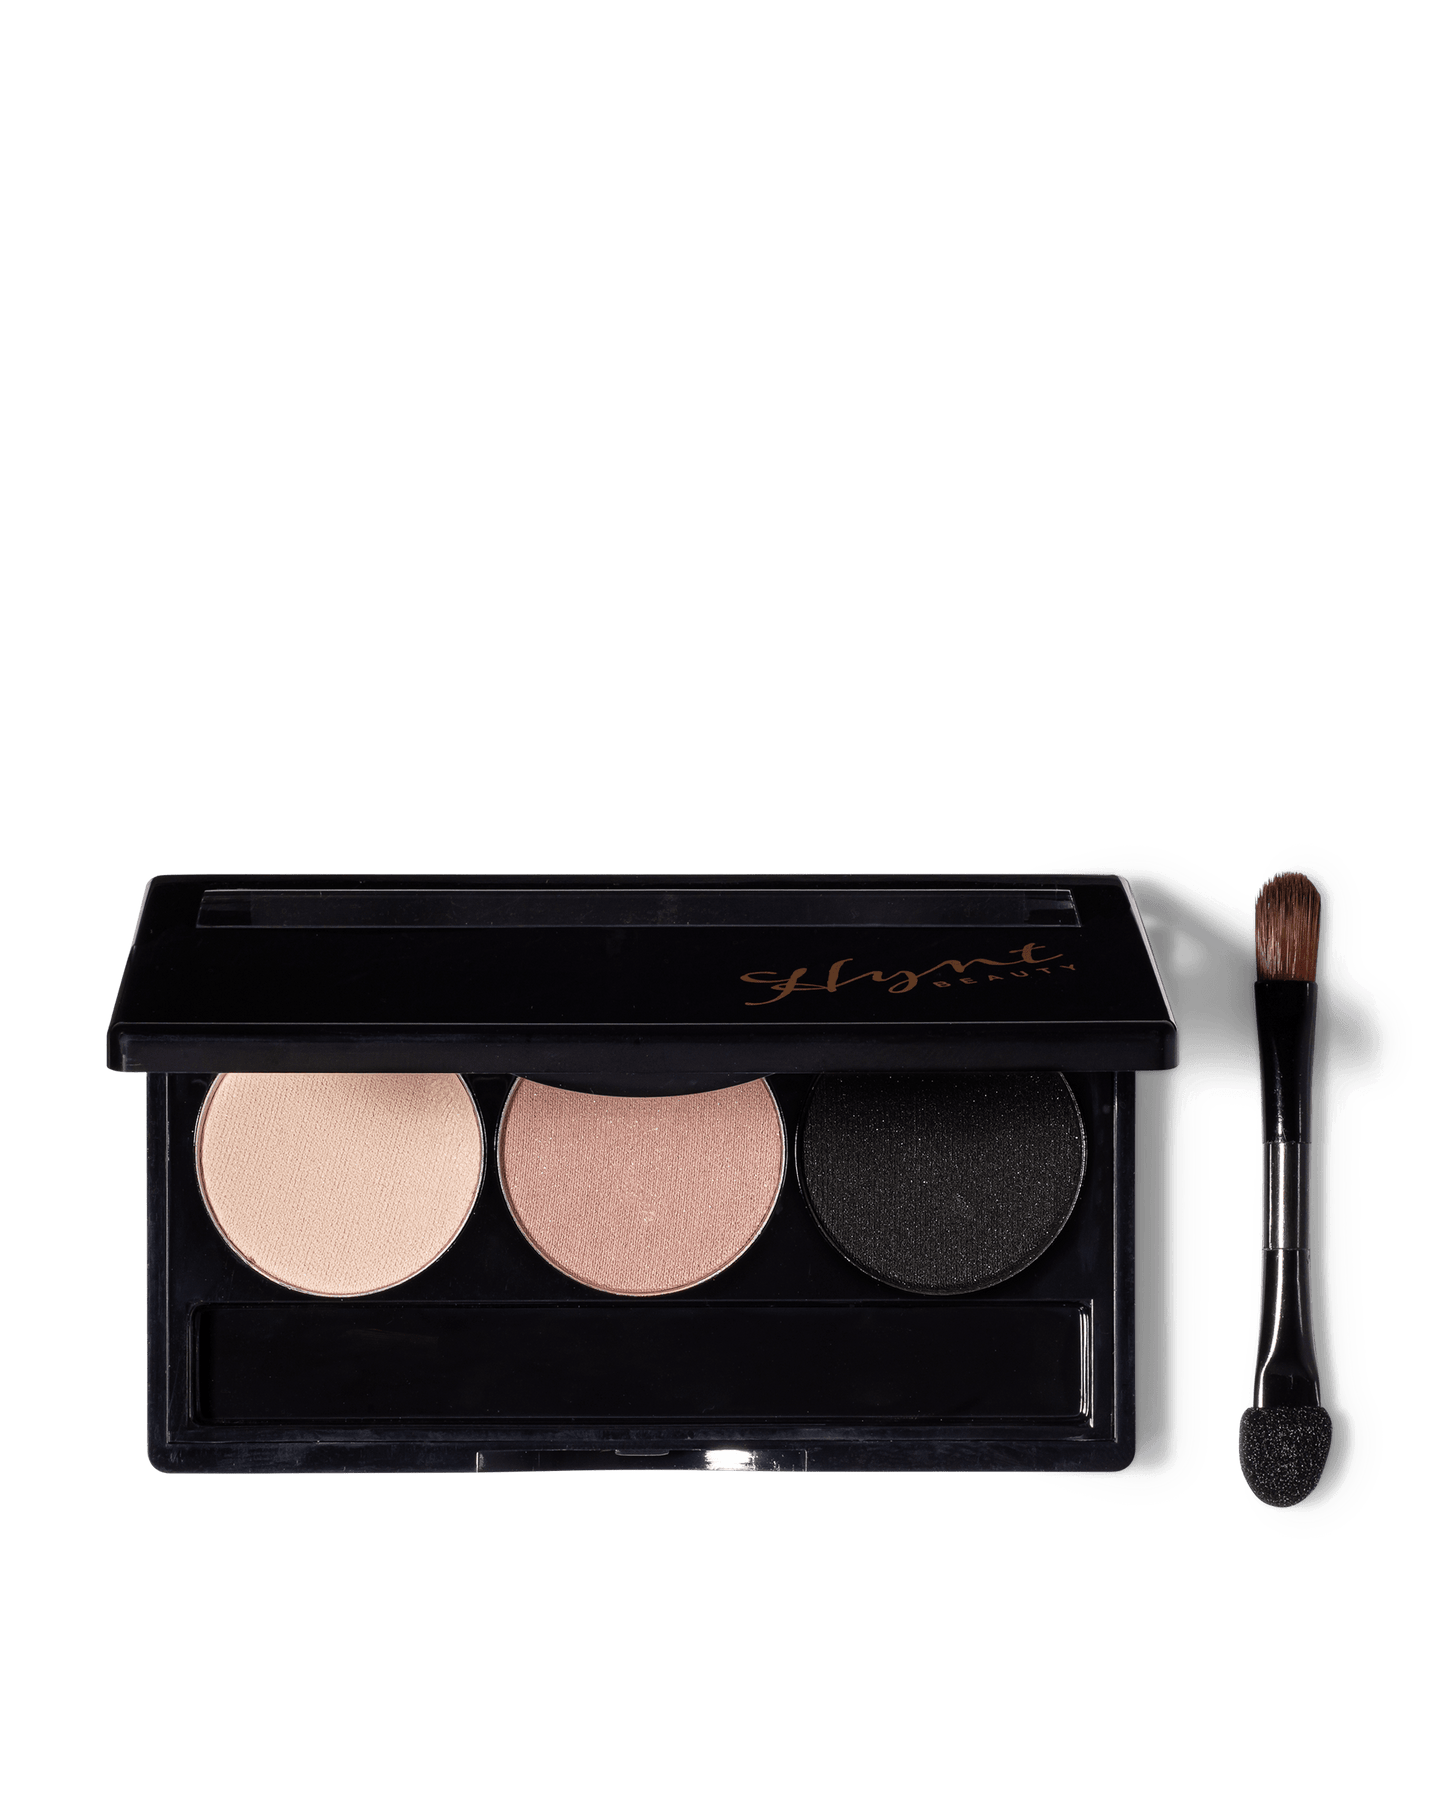 ${ title} at $39 only from Hynt Beauty